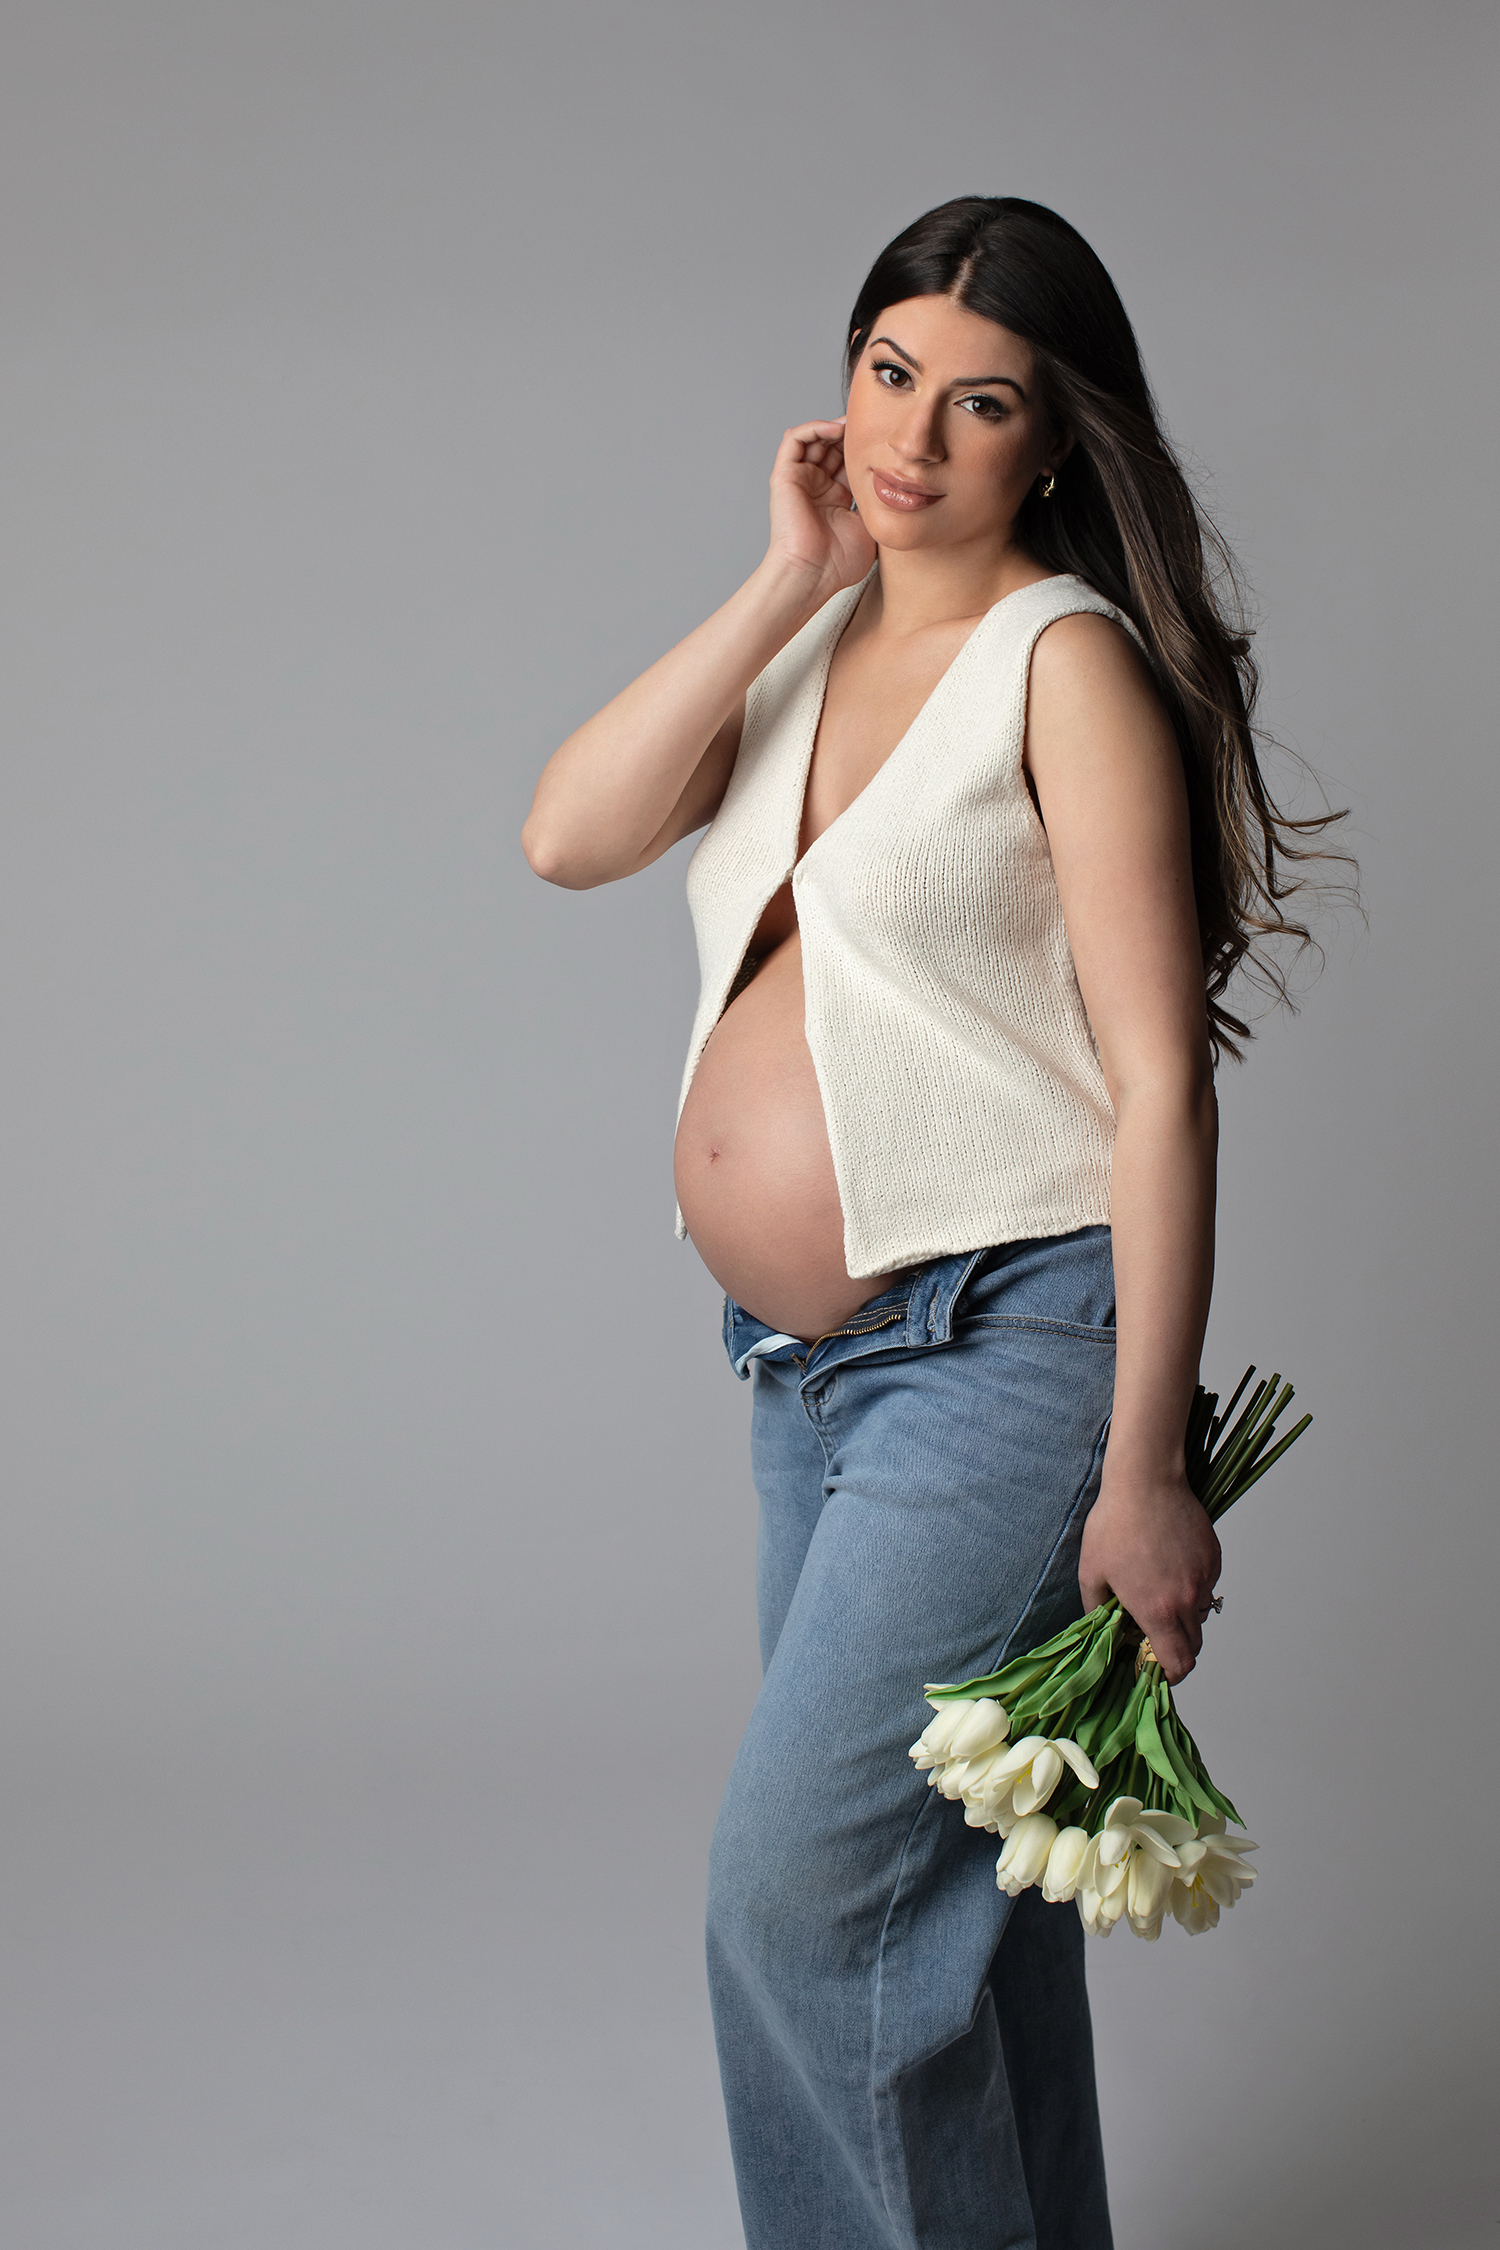 a pregnant woman in a casual outfit holding flowers